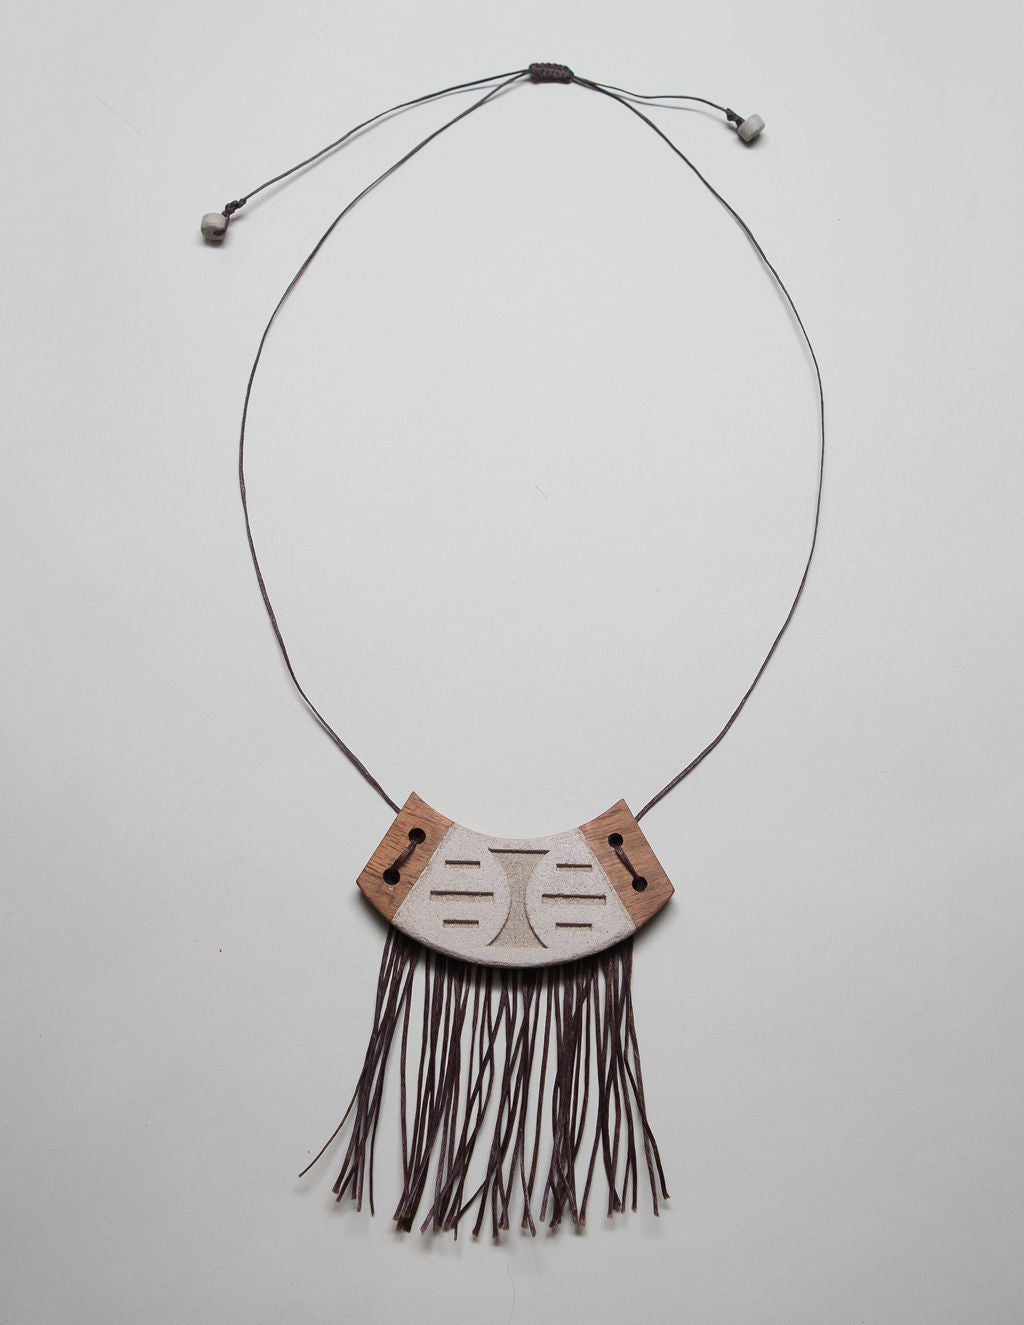 Yomo Studio crescent necklace. Materials include: concrete, walnut wood, and wax string.